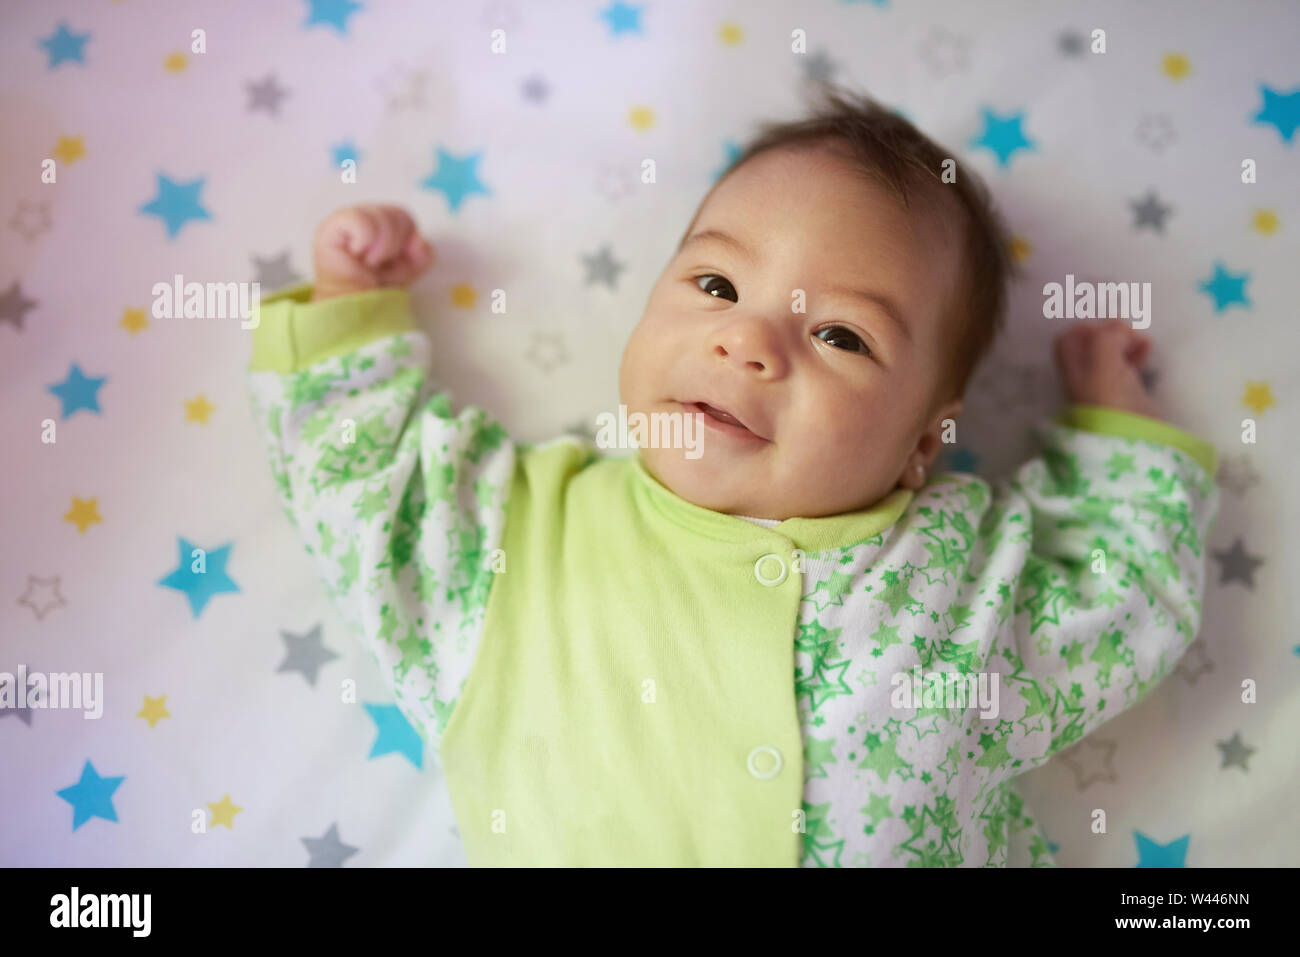 Portrait of baby lay in bed in green creamy colors Stock Photo